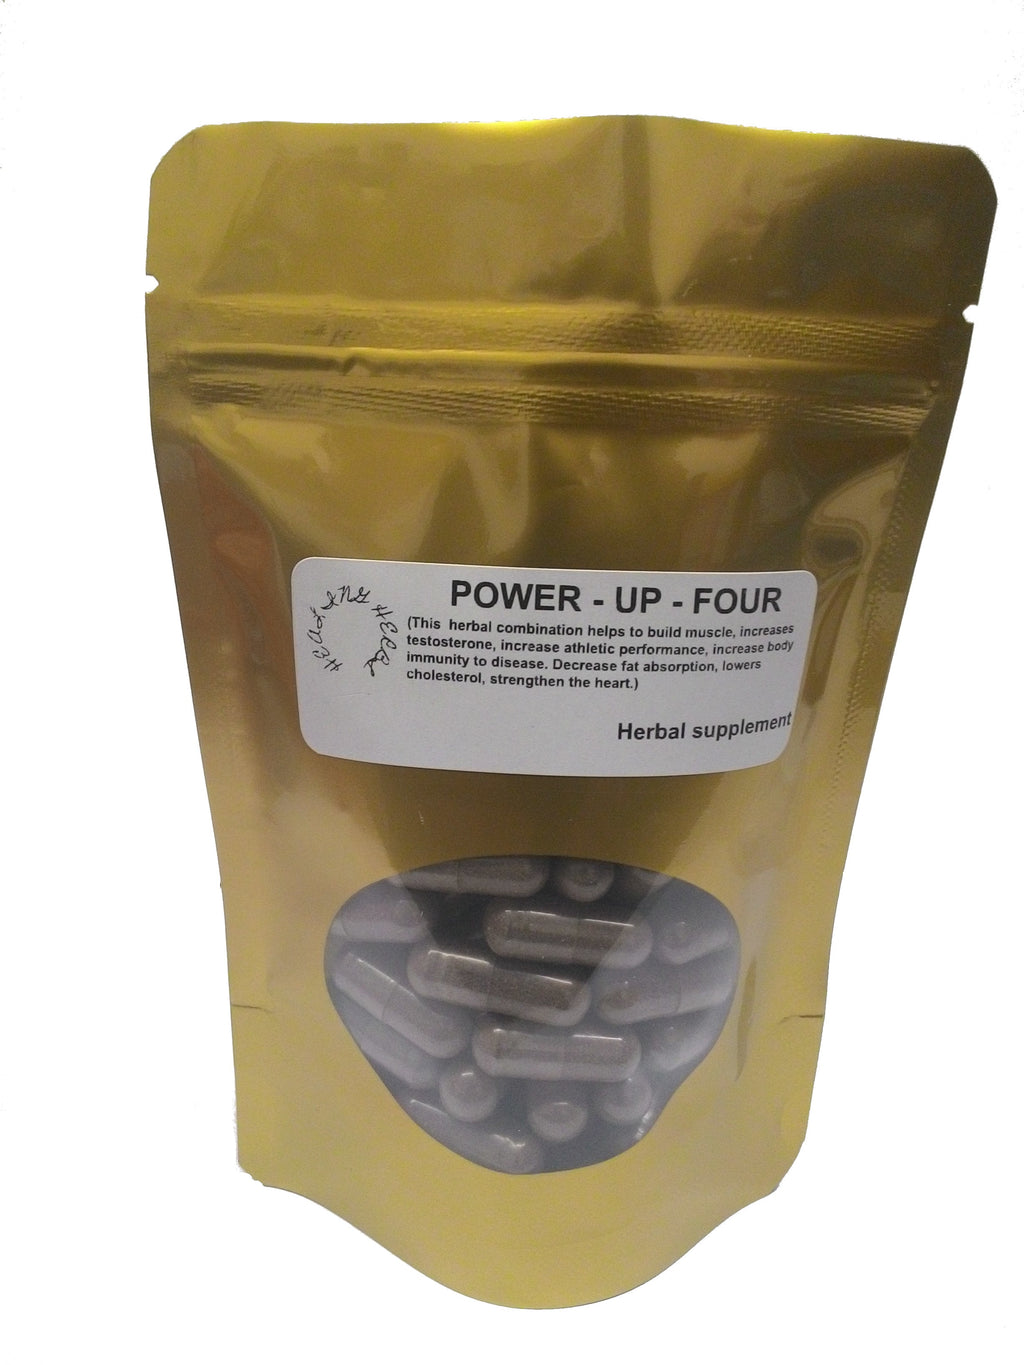 this image is of POWER UP FOUR" it helps to built muscle increase testosterone increase immunity to disease